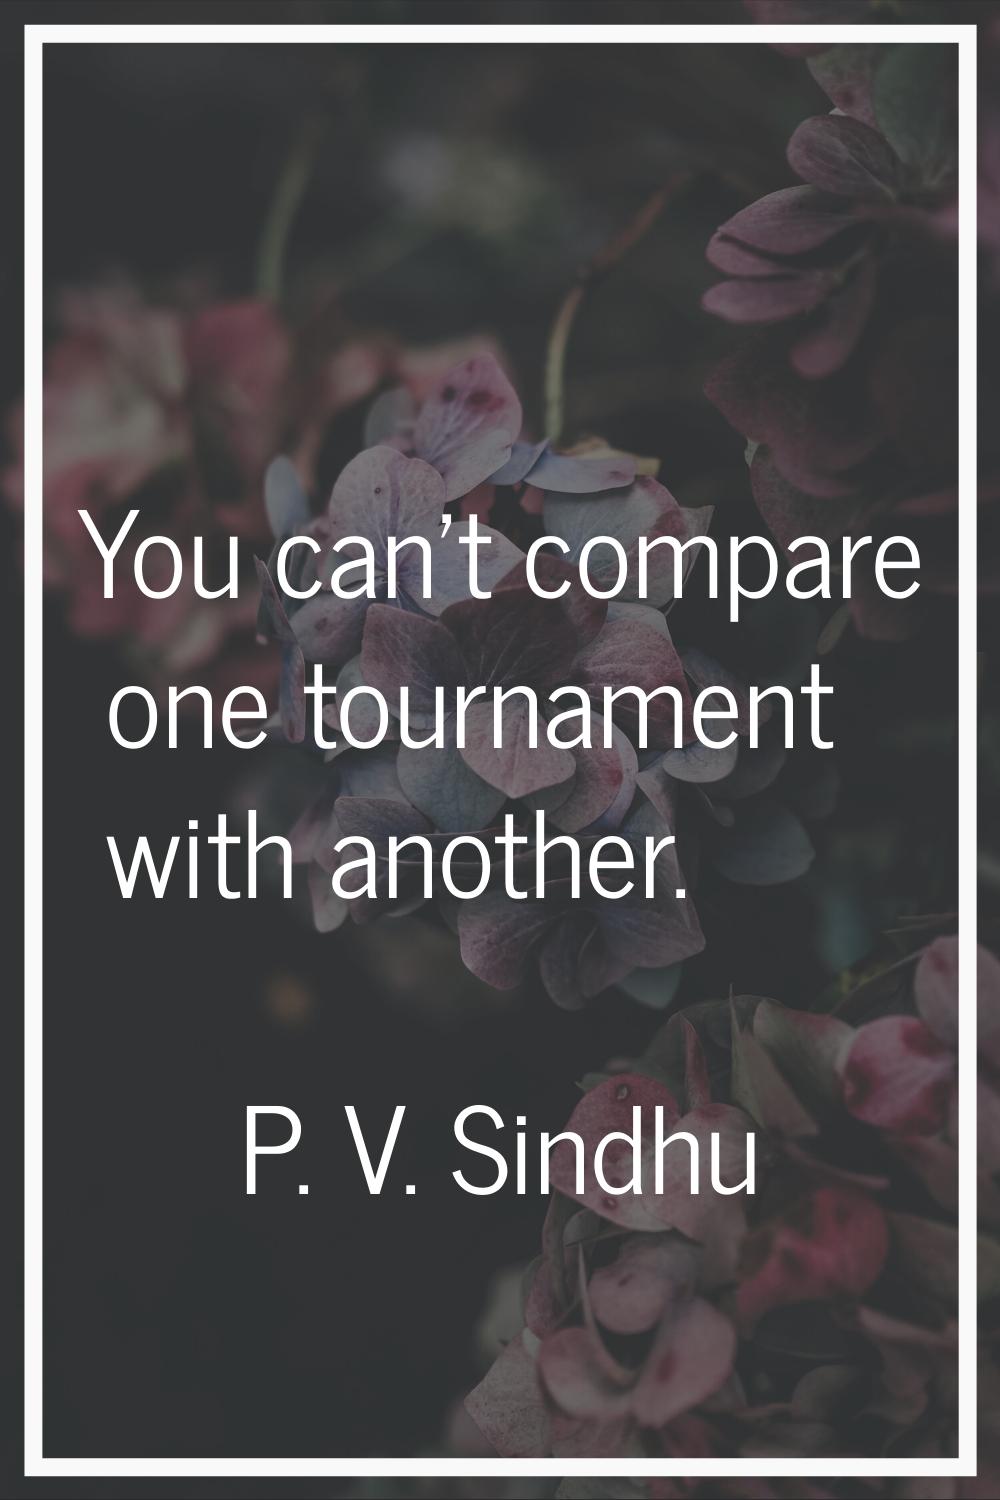 You can't compare one tournament with another.